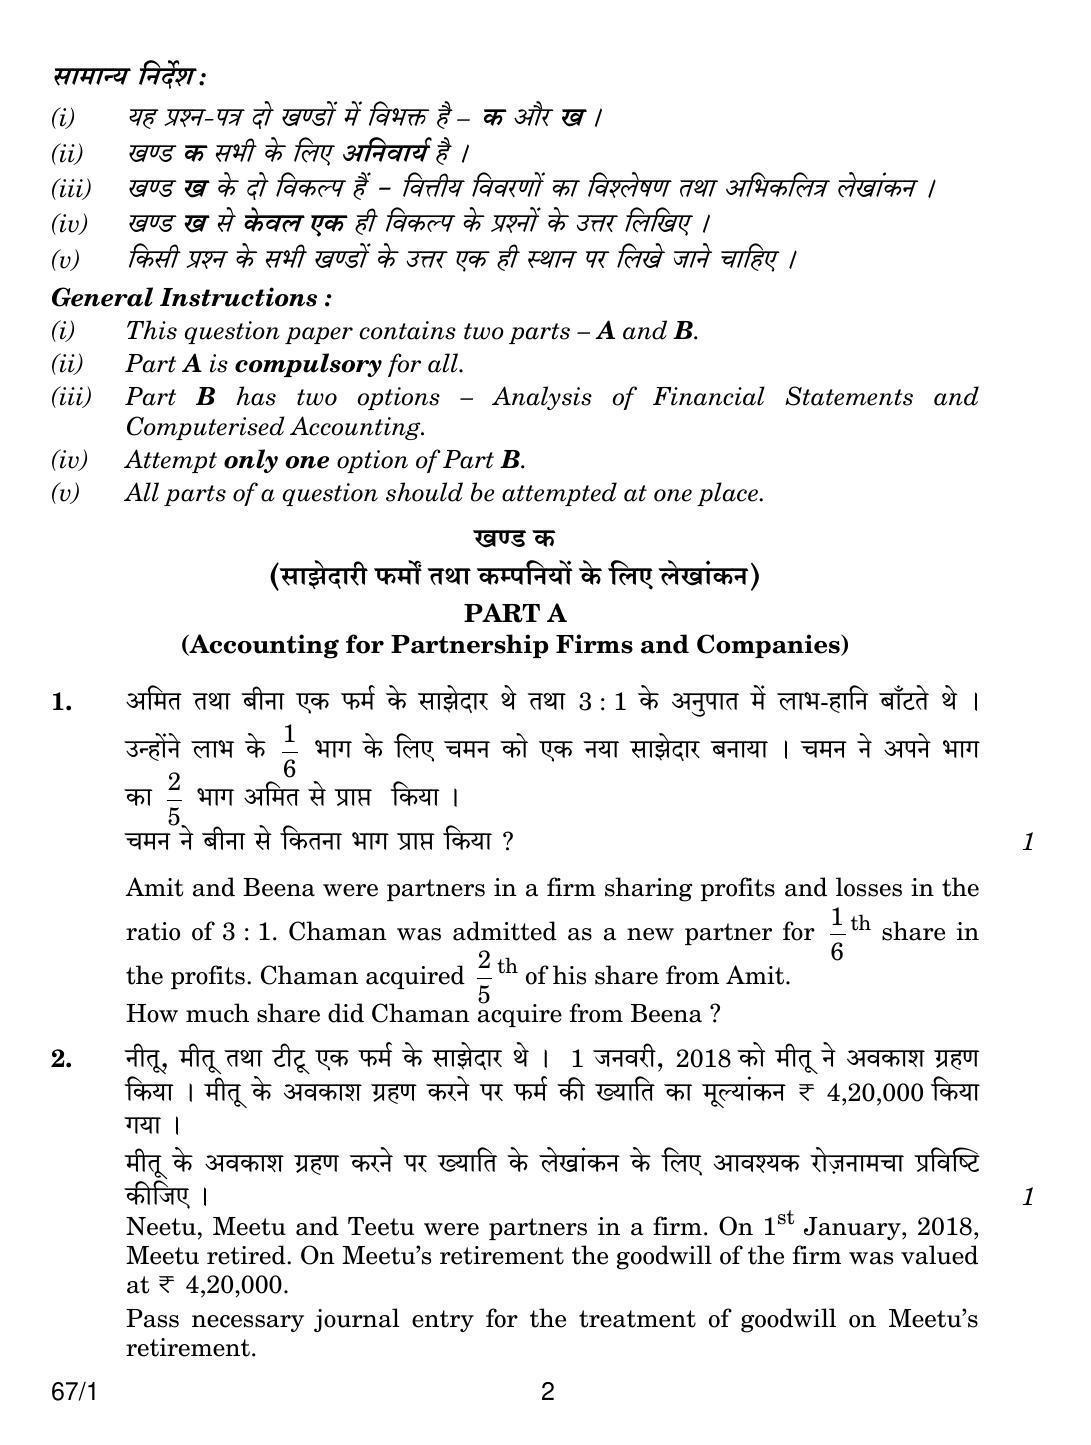 CBSE Class 12 67-1 ACCOUNTANCY 2018 Question Paper - Page 2